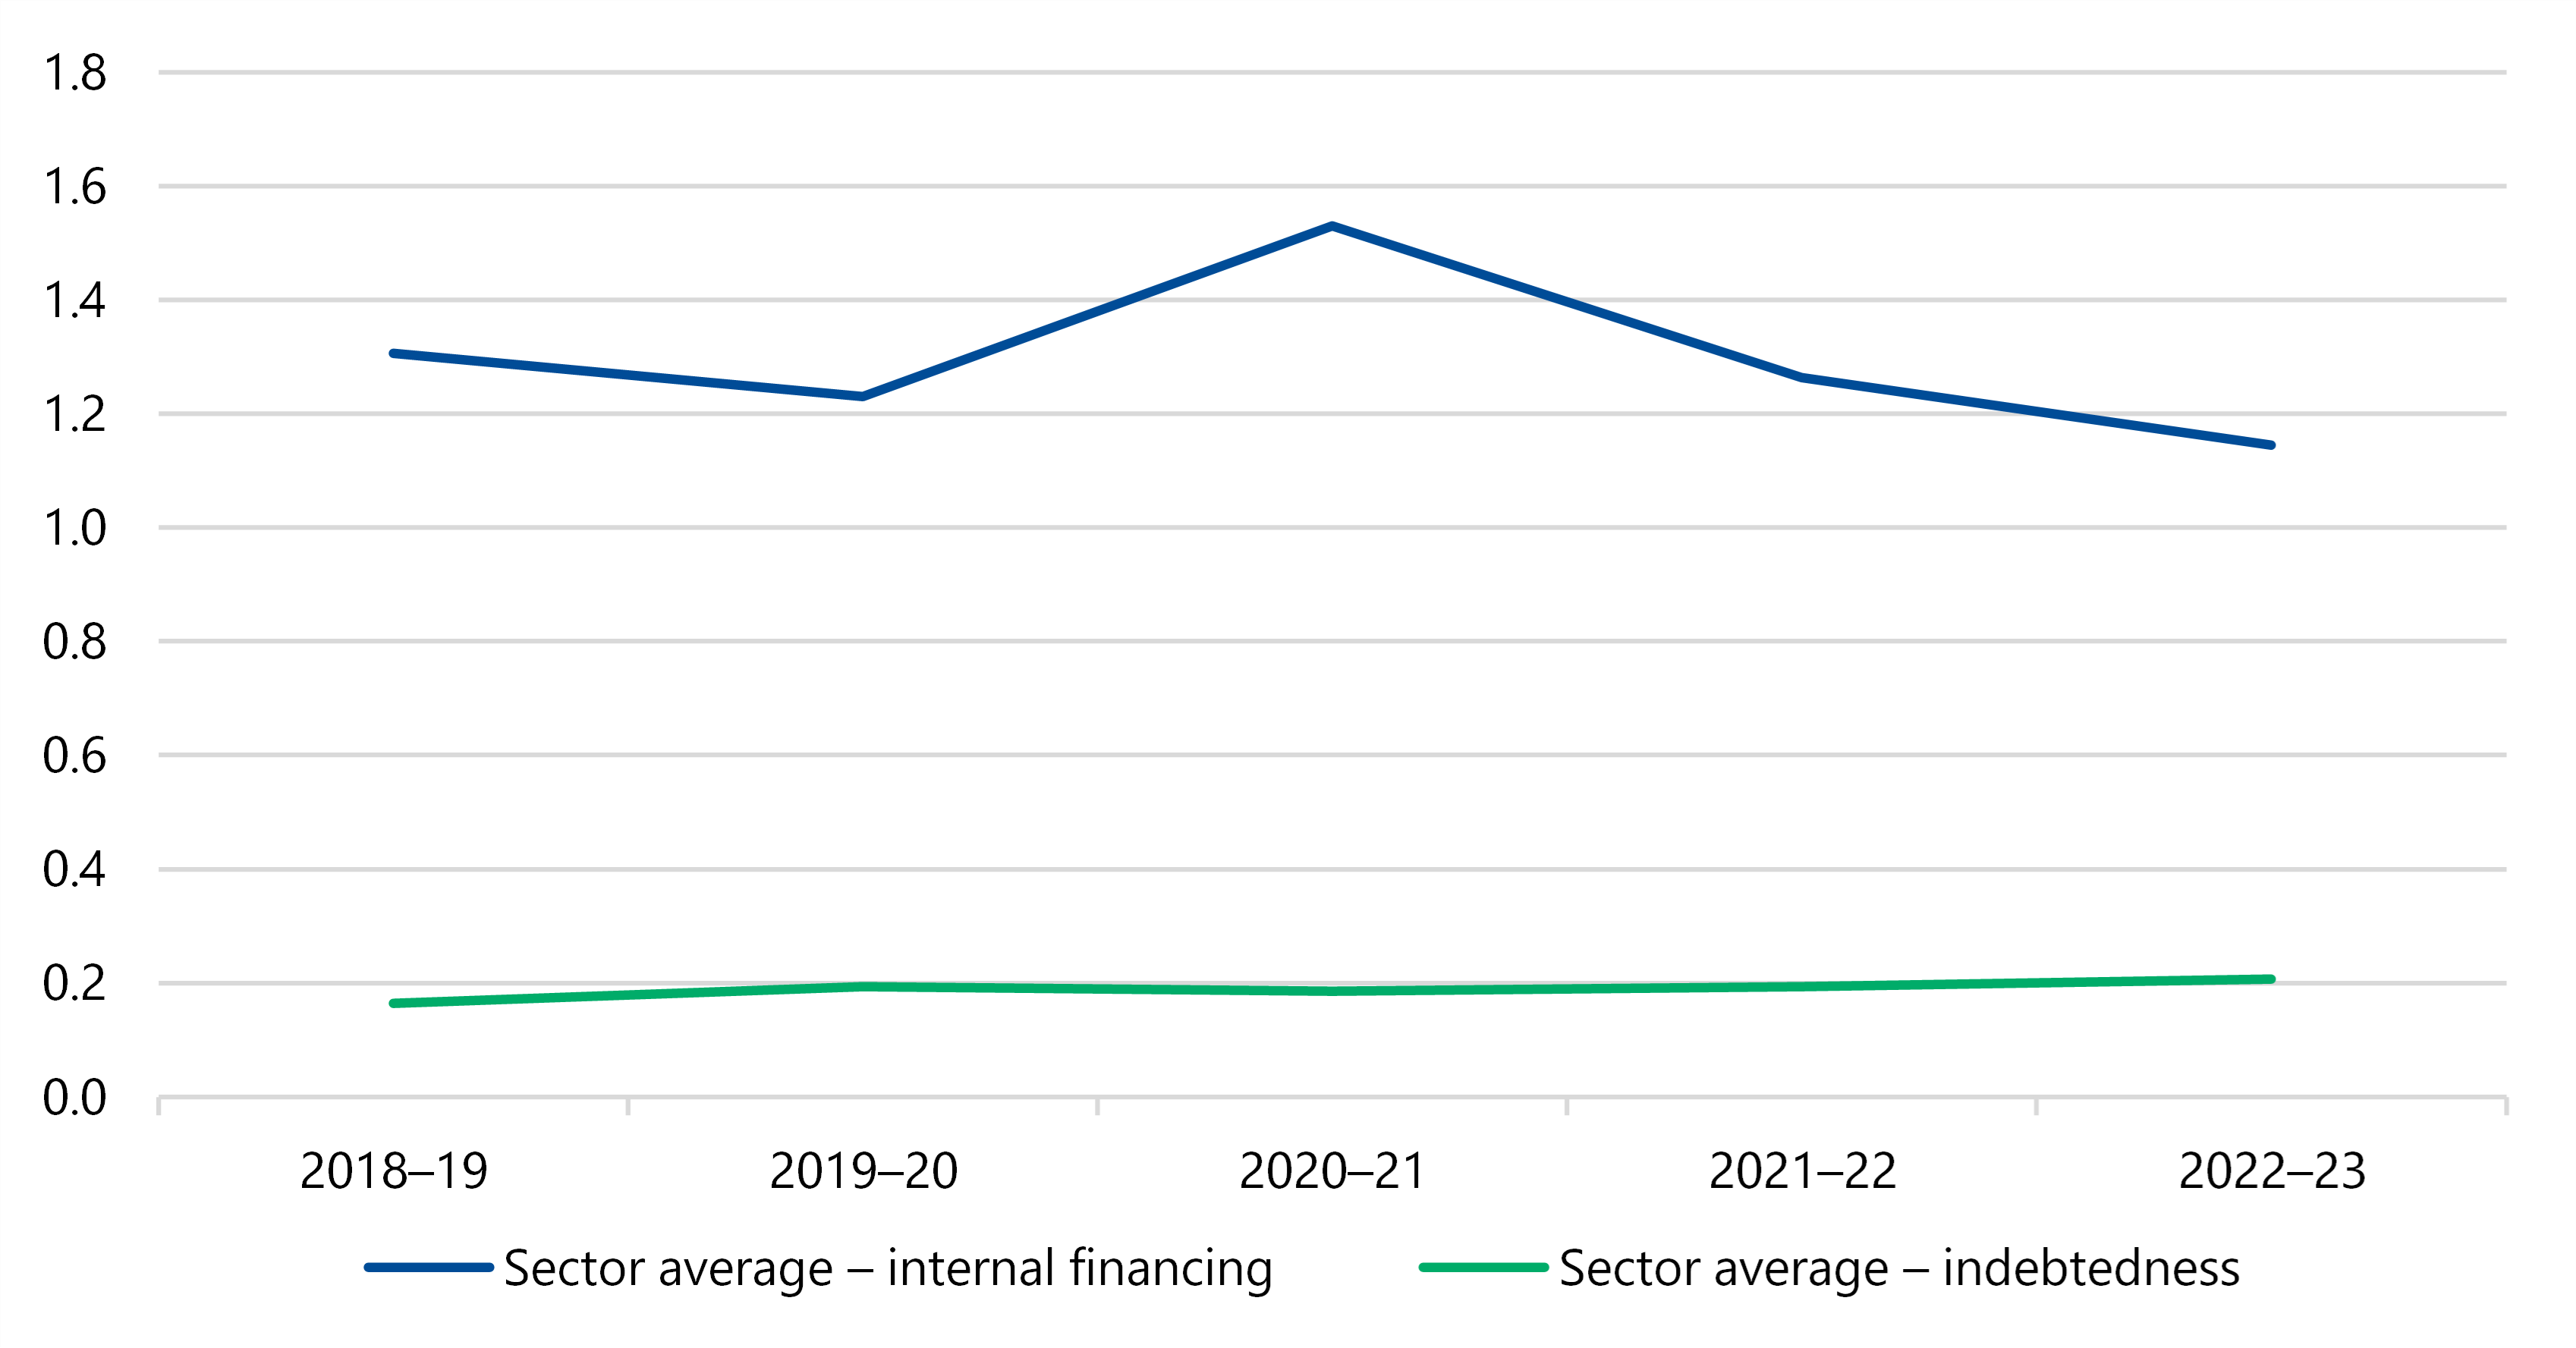 Figure 13 is a stacked line graph showing that the sector average for internal financing was just over 1.3 in 2018–19 and just over 1.2 in 2019–20, then rose to a bit over 1.5 in 2020–21, before falling away to a bit below 1.3 in 2021–22, then below 1.2 again in 2022–23. The sector average for indebtedness showed an overall slight gain over that time, being around 0.2 throughout.